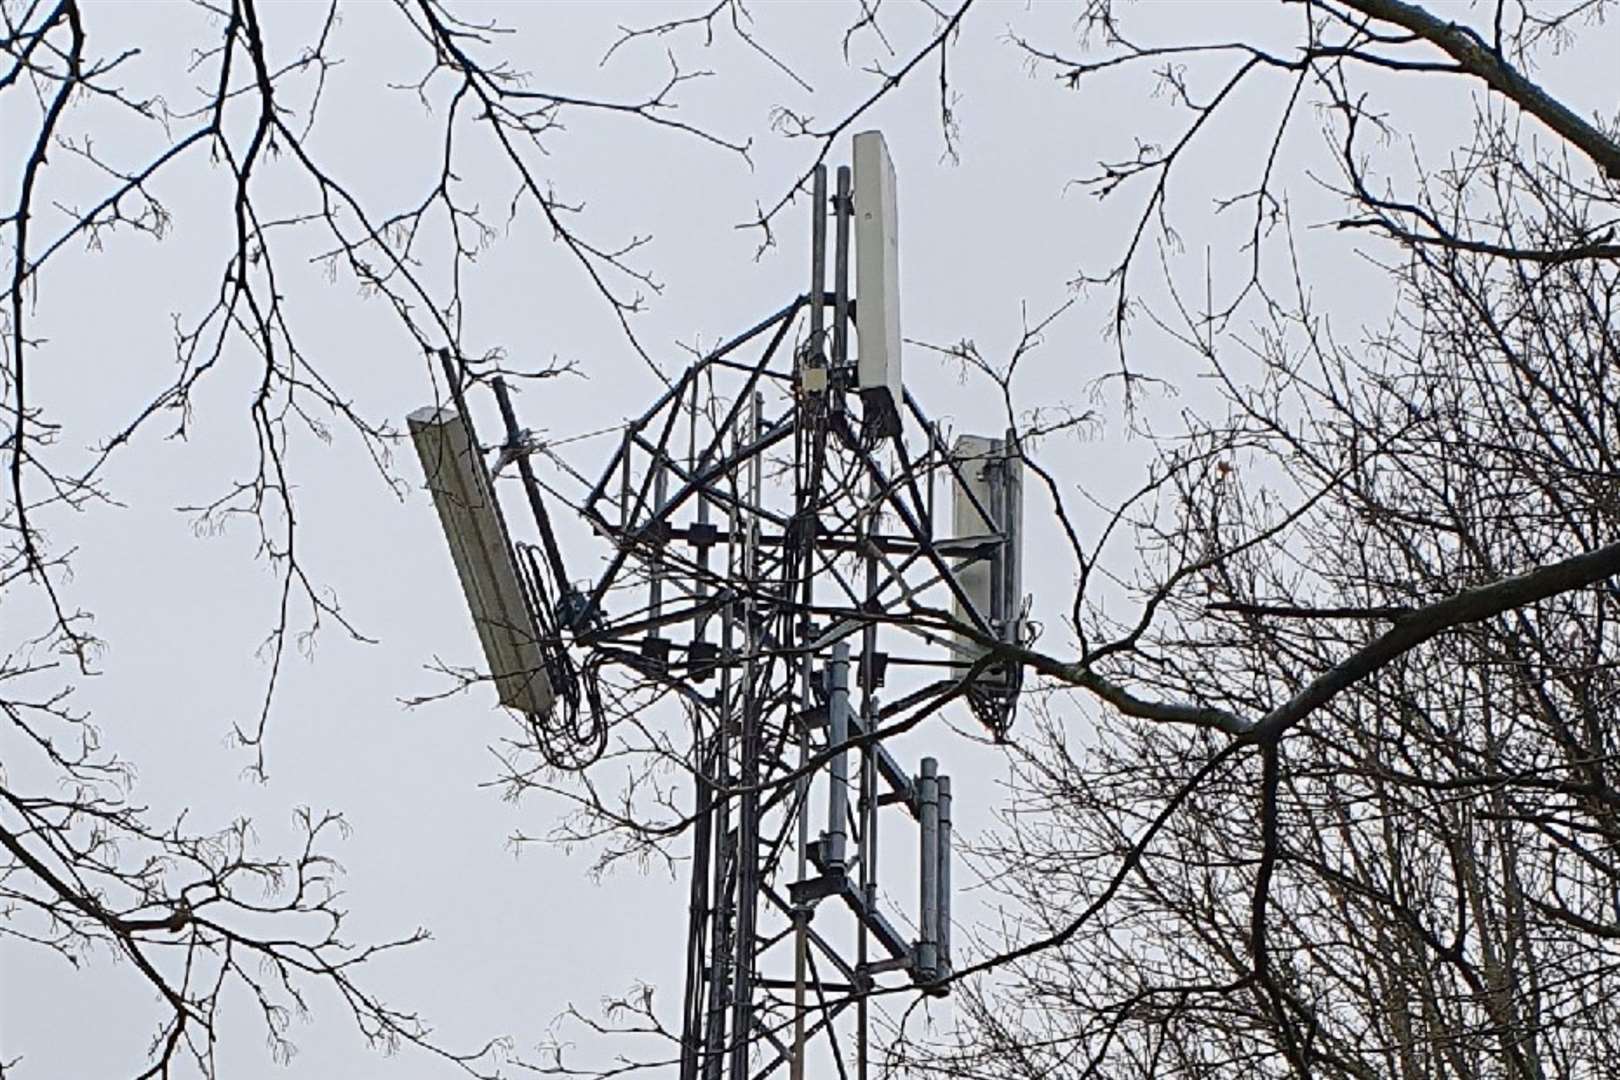 The damaged phone mast has an antenna hanging off. Picture: My Tenterden